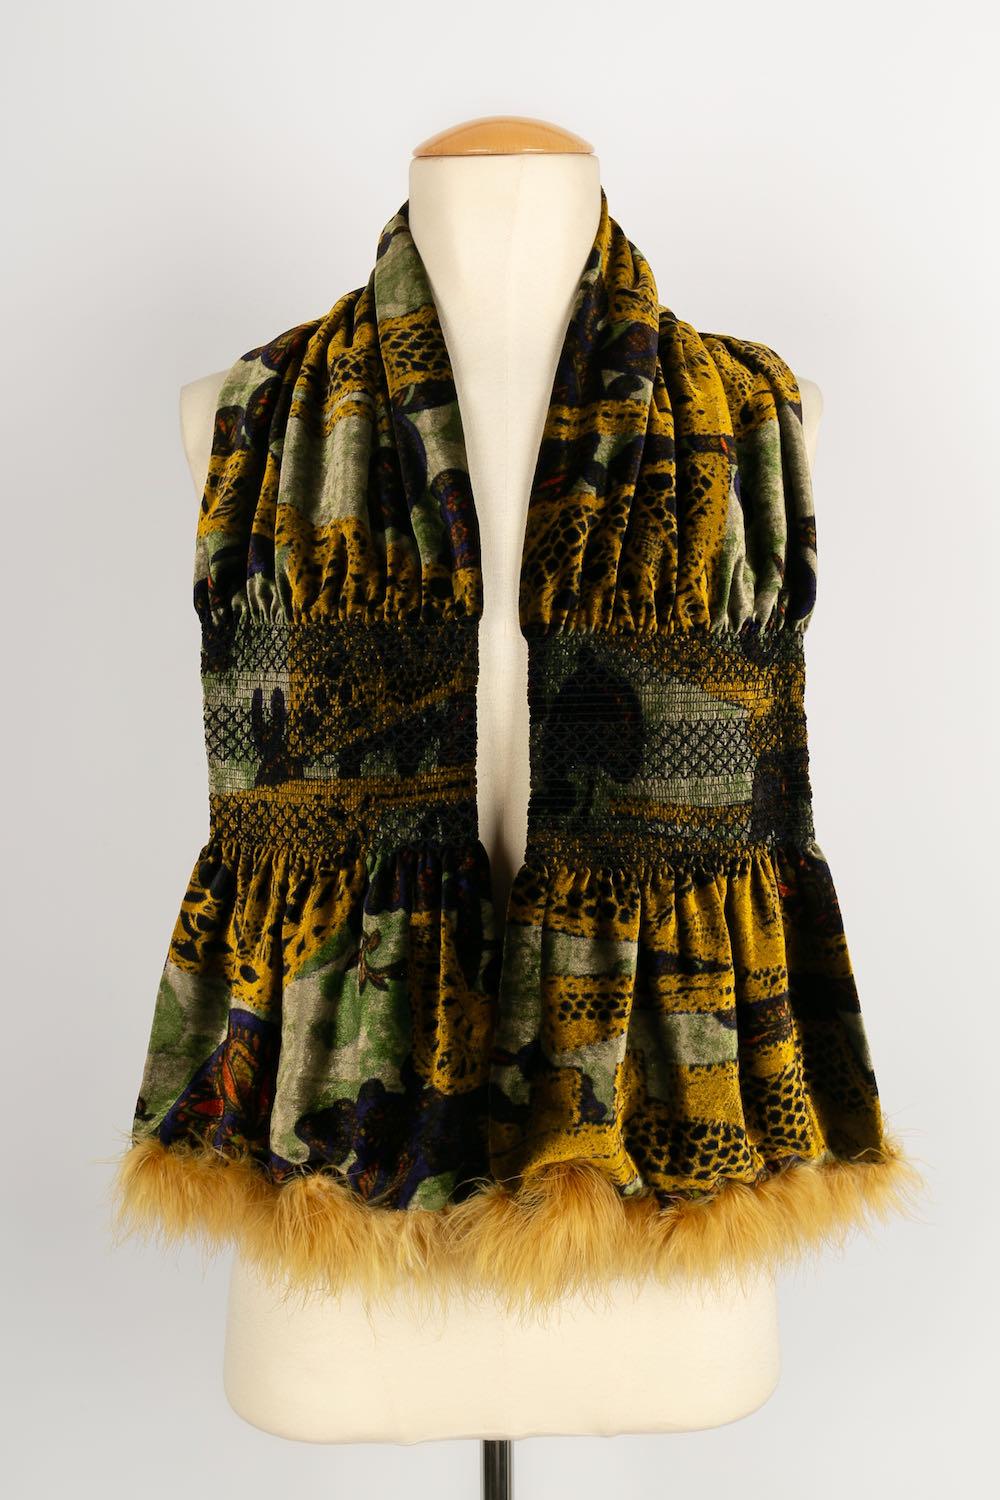 Black Christian Lacroix Velvet Scarf in Shades of Green and Yellow For Sale